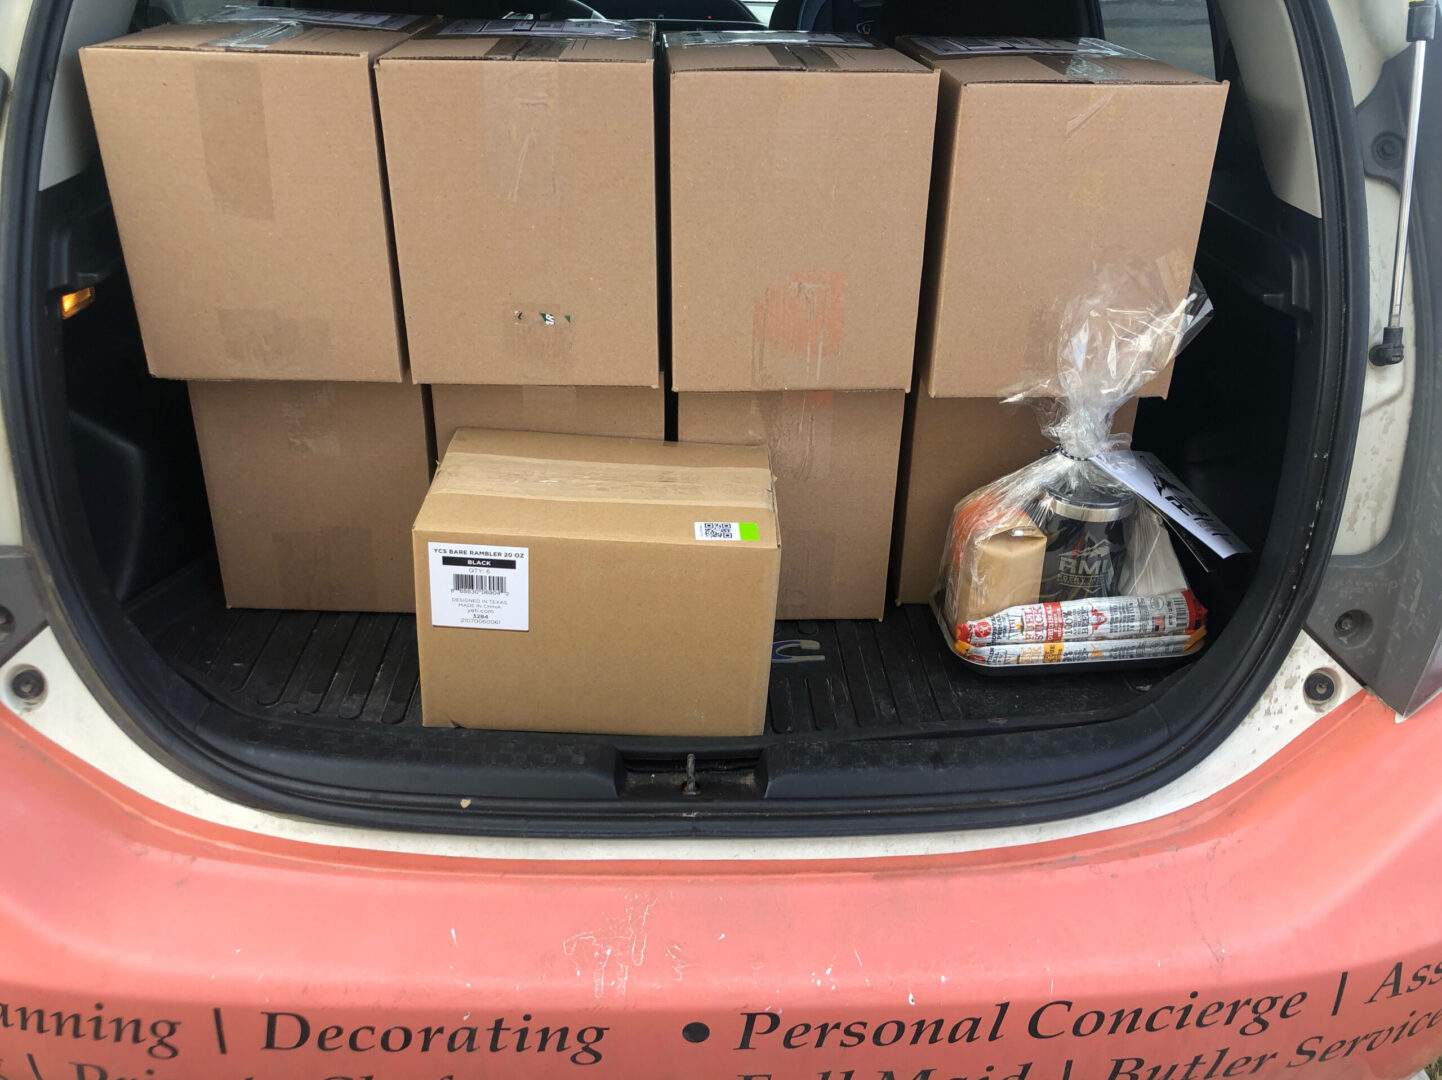 A trunk with boxes and a box in it